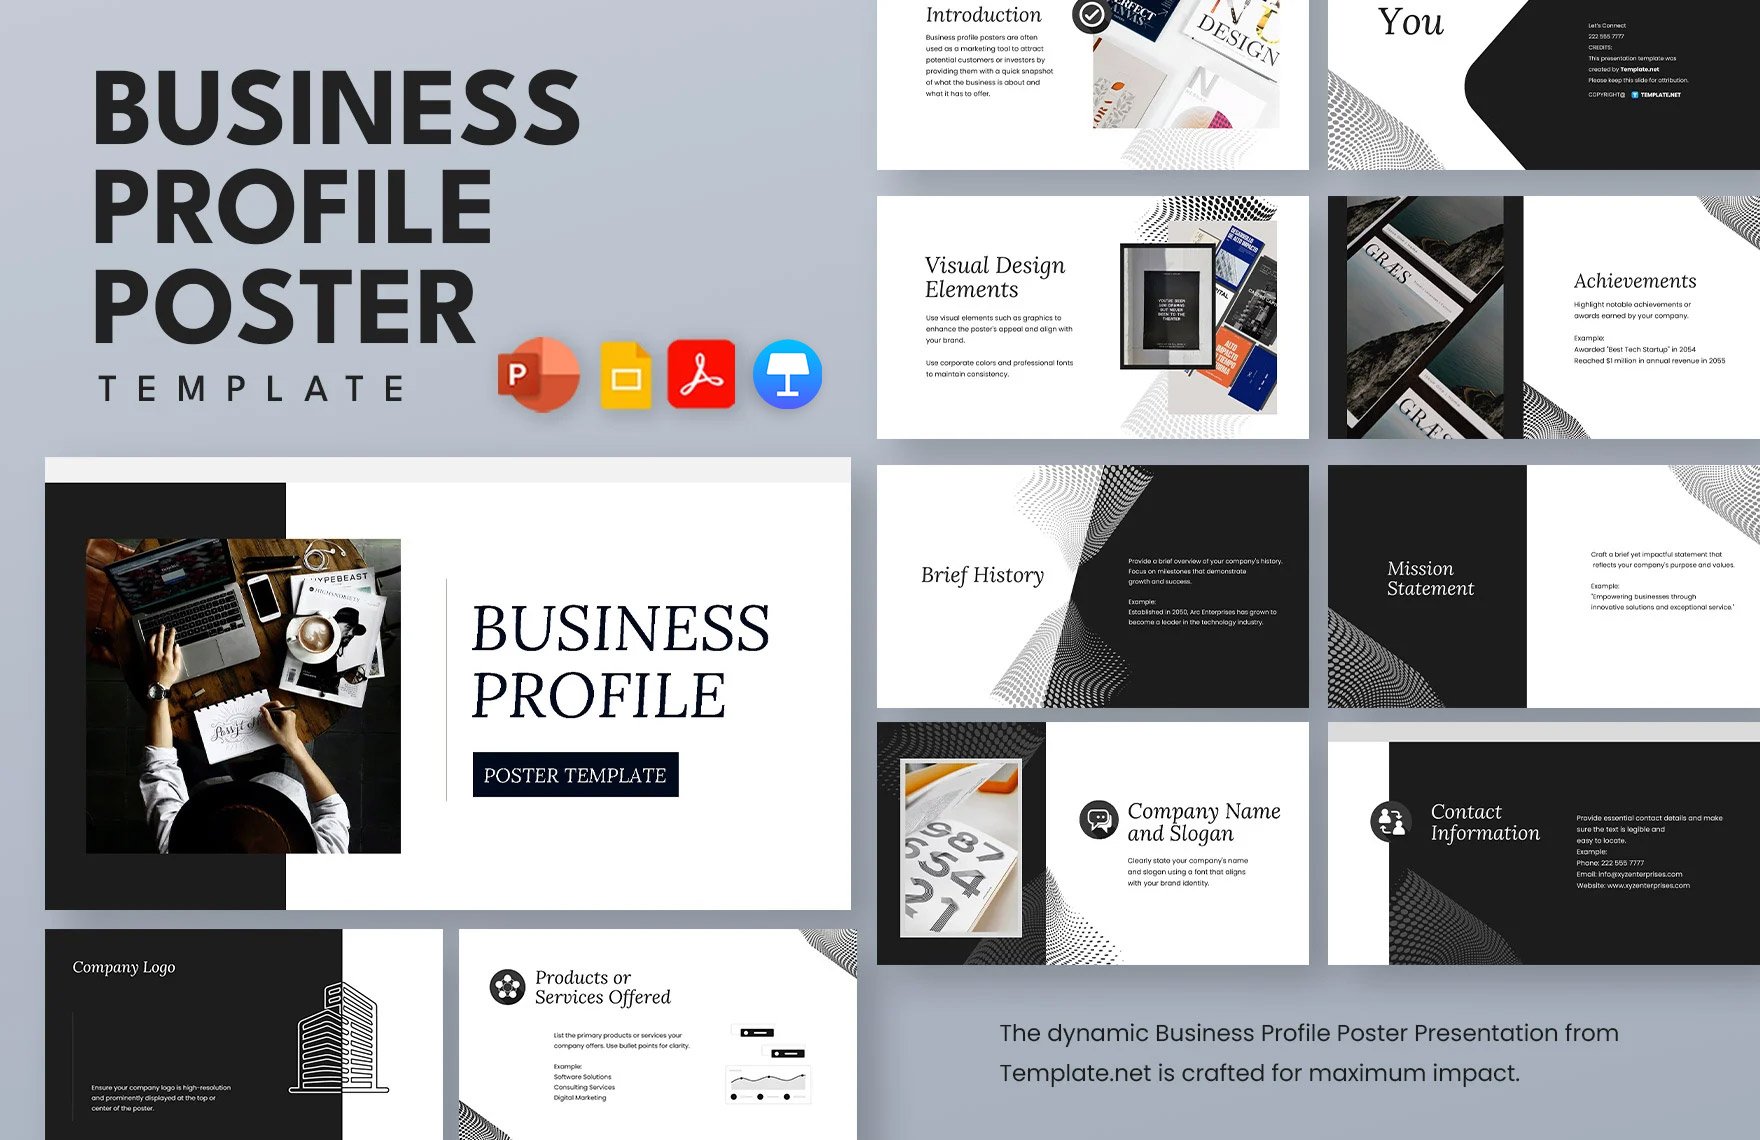 Business Profile Poster Template